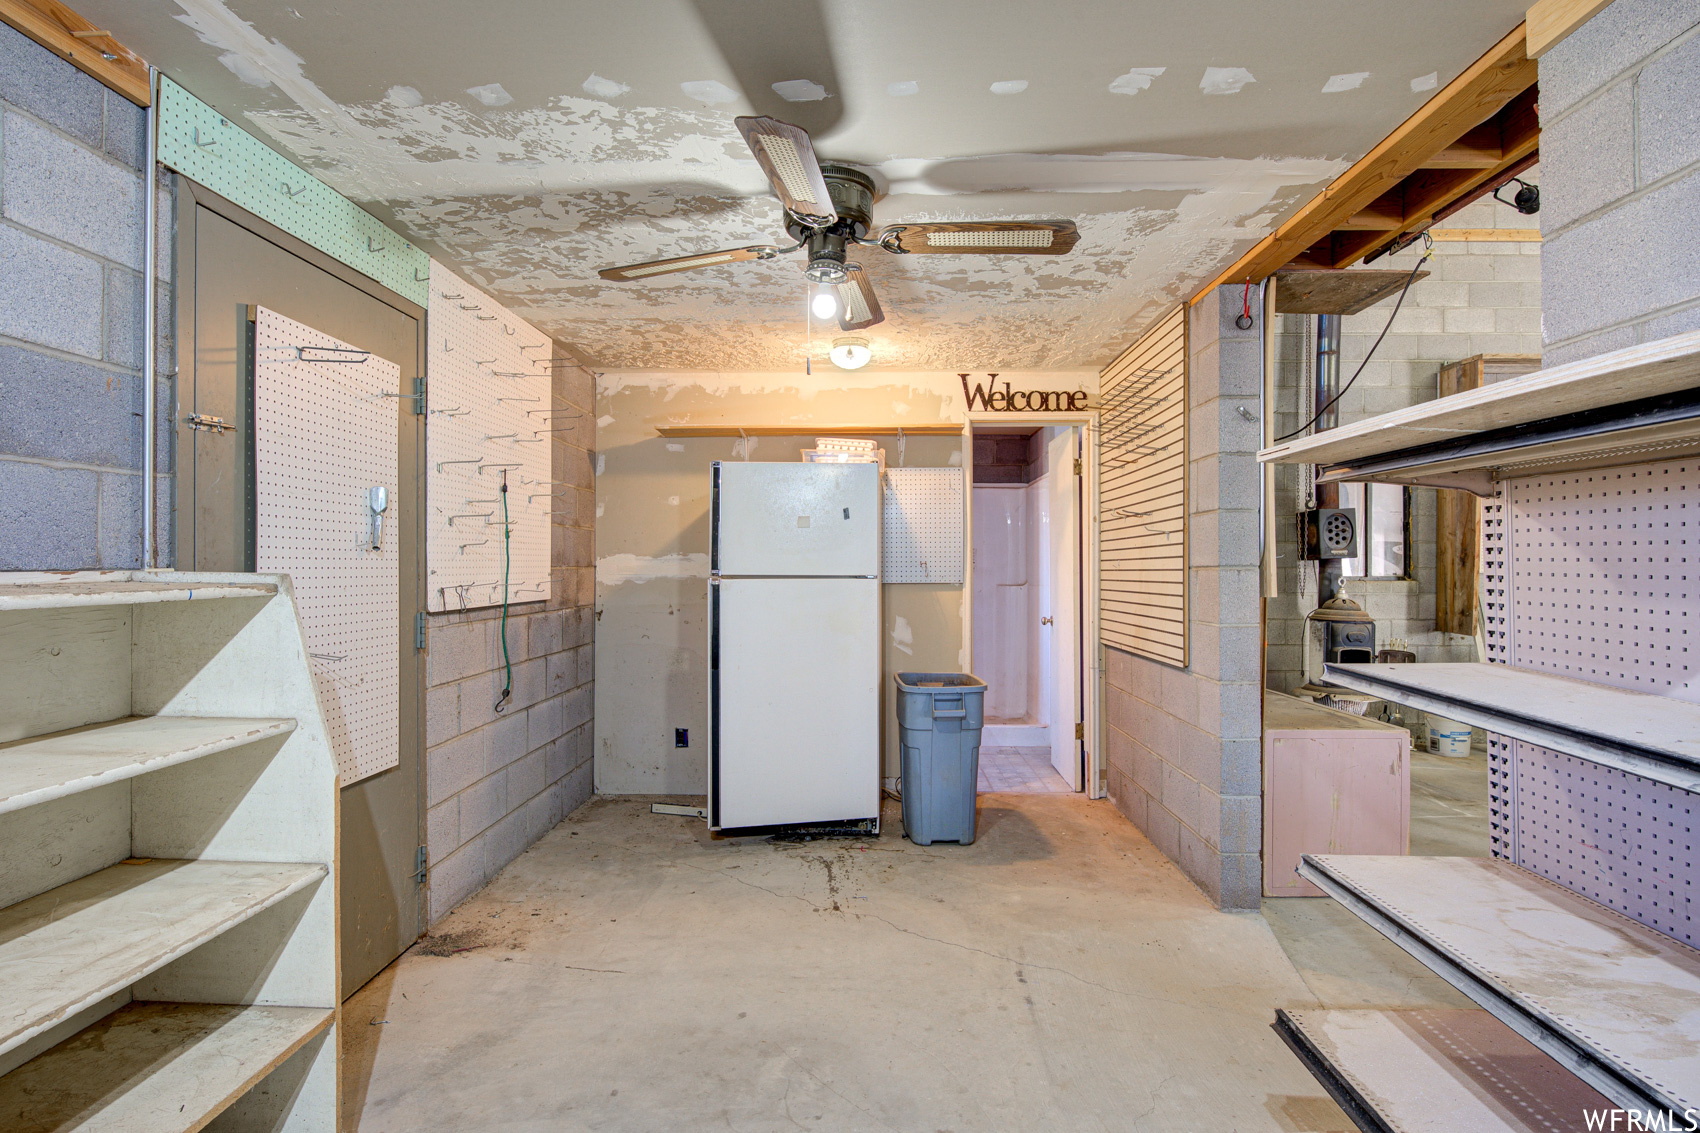 Basement with ceiling fan and white refrigerator